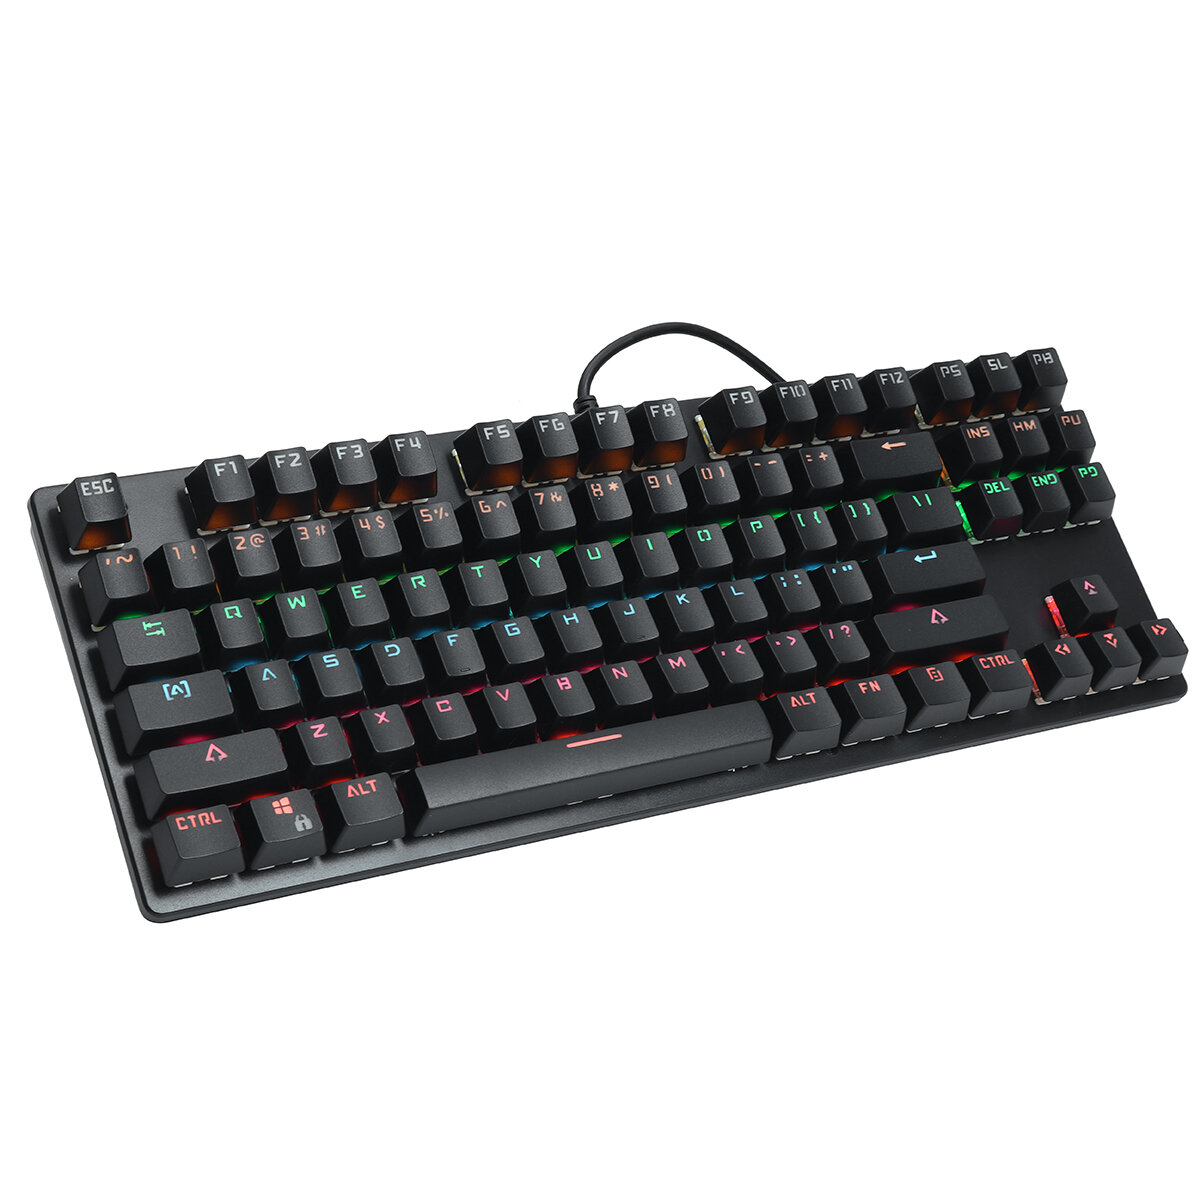 ICEDI K870 Wired Mechanical Keyboard 87 Keys Hot Swappable Blue Switch Suspended Keycaps RGB Backlit Gaming Keyboard wit